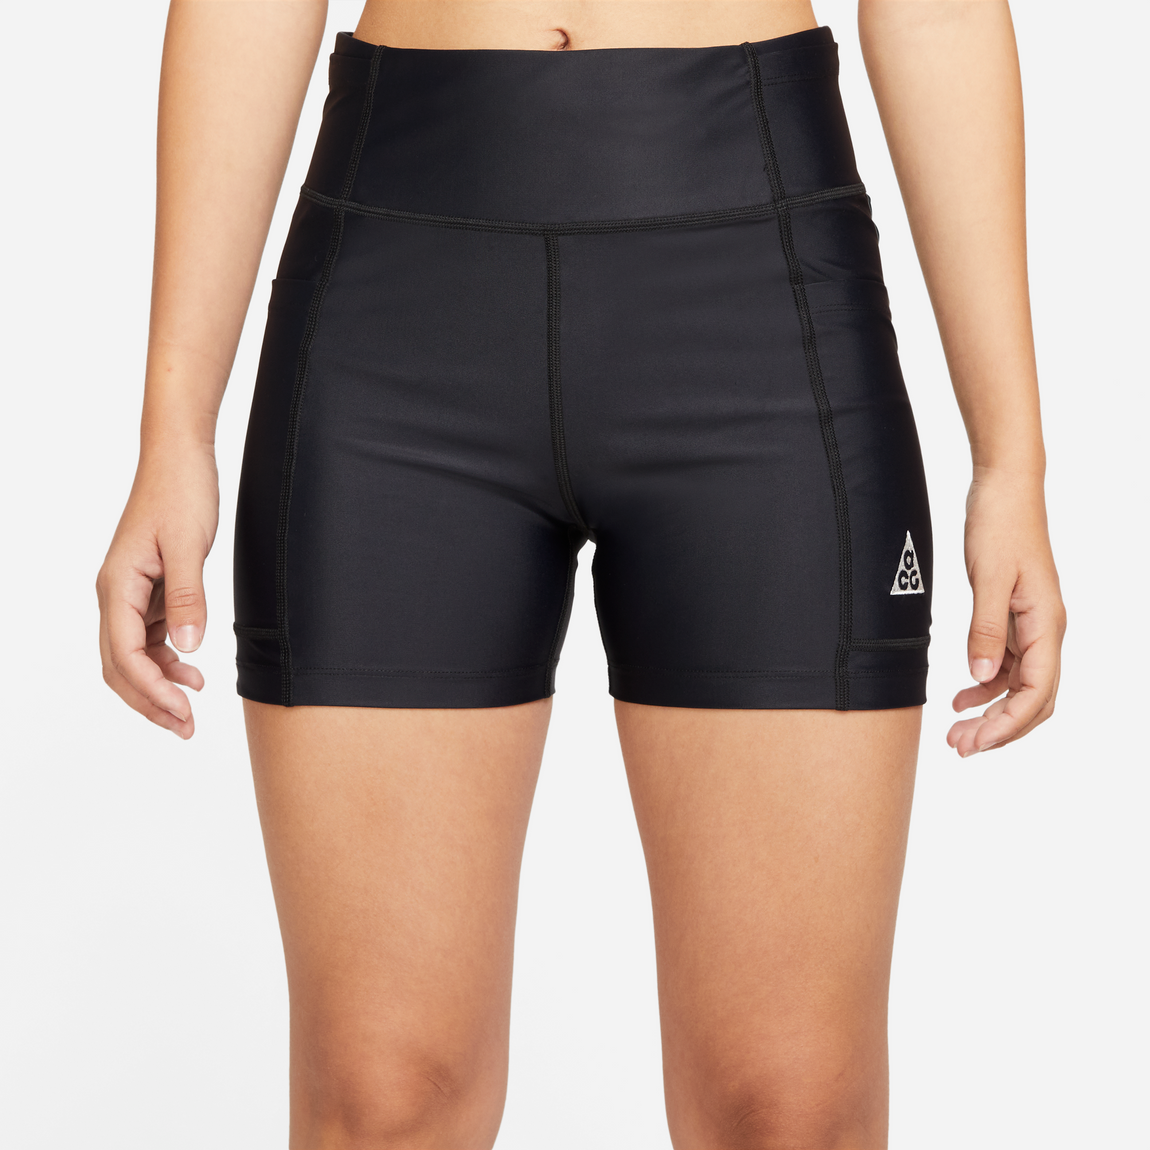 Nike ACG Women's Dri-FIT ADV 'Crater Lookout' Shorts (Black/Summit White) - Nike ACG Women's Dri-FIT ADV 'Crater Lookout' Shorts (Black/Summit White) - 